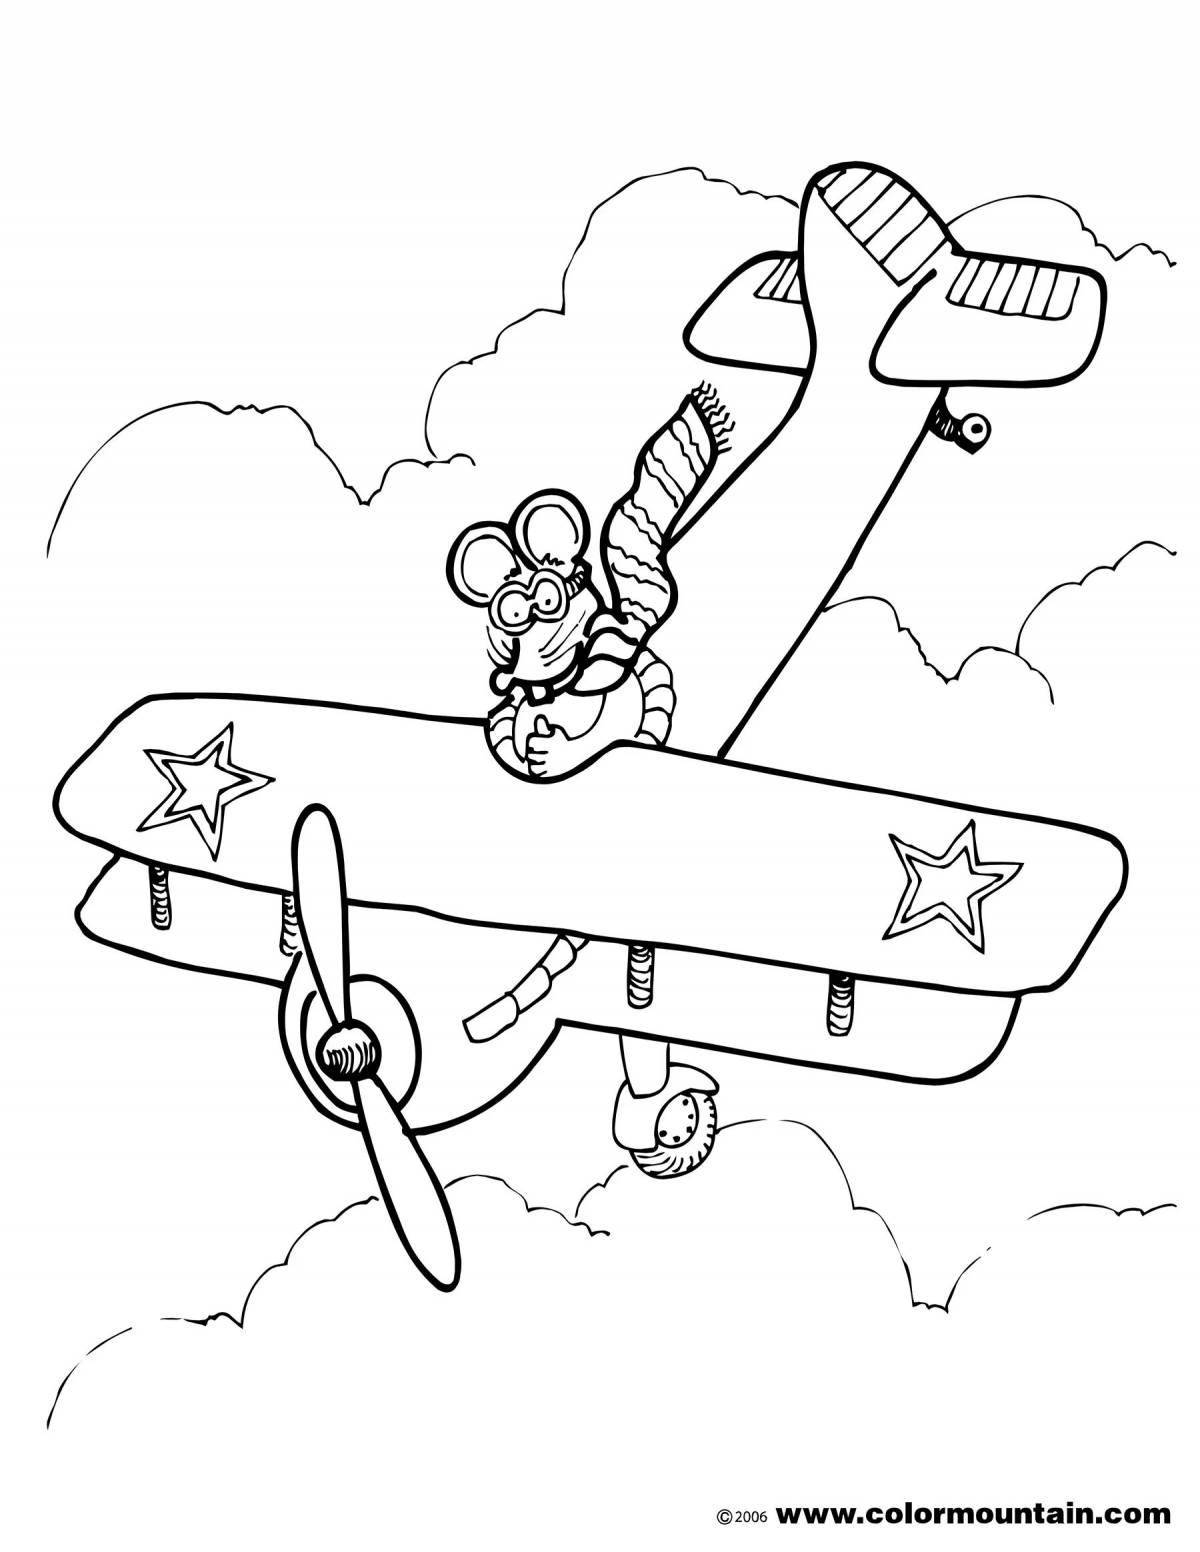 Great military pilot coloring for kids